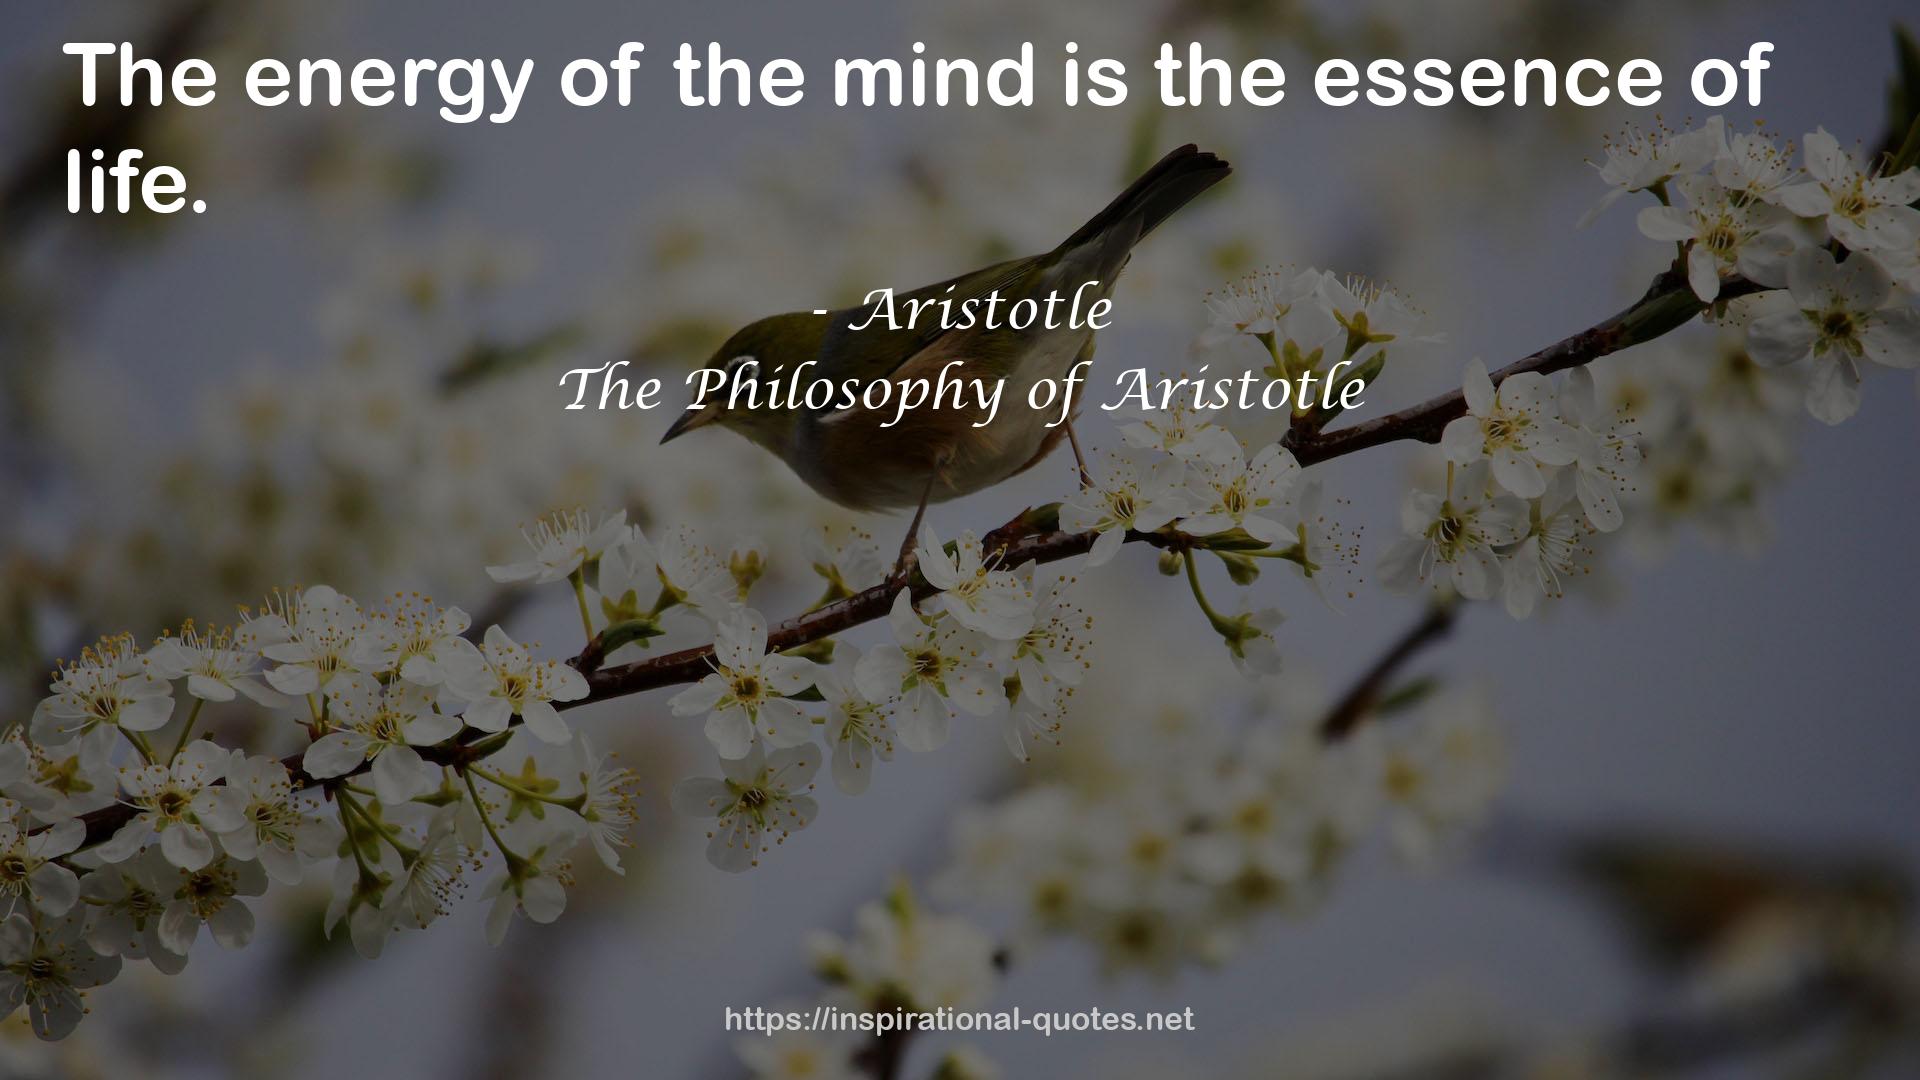 The Philosophy of Aristotle QUOTES